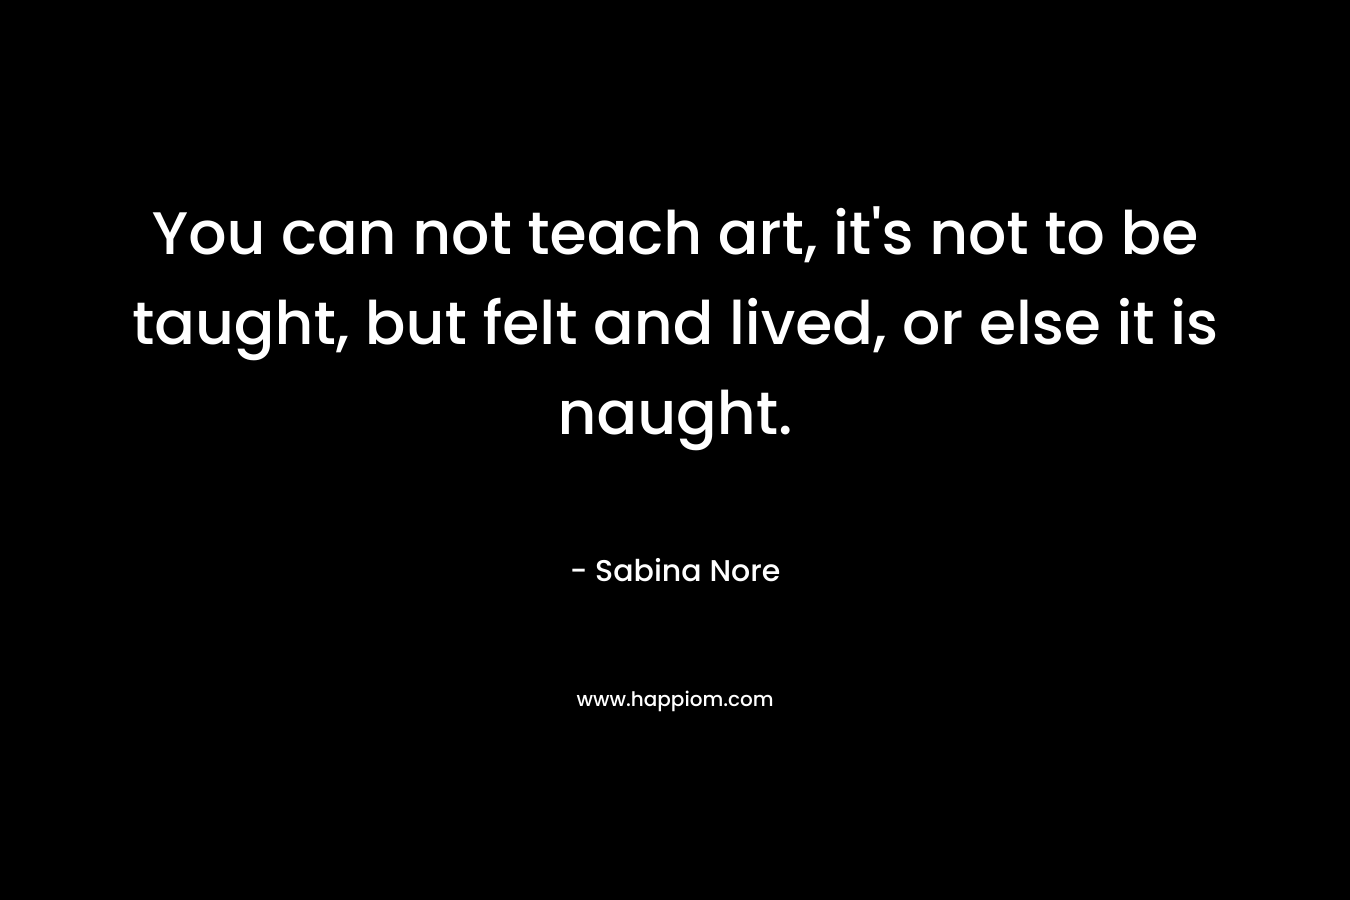 You can not teach art, it's not to be taught, but felt and lived, or else it is naught.